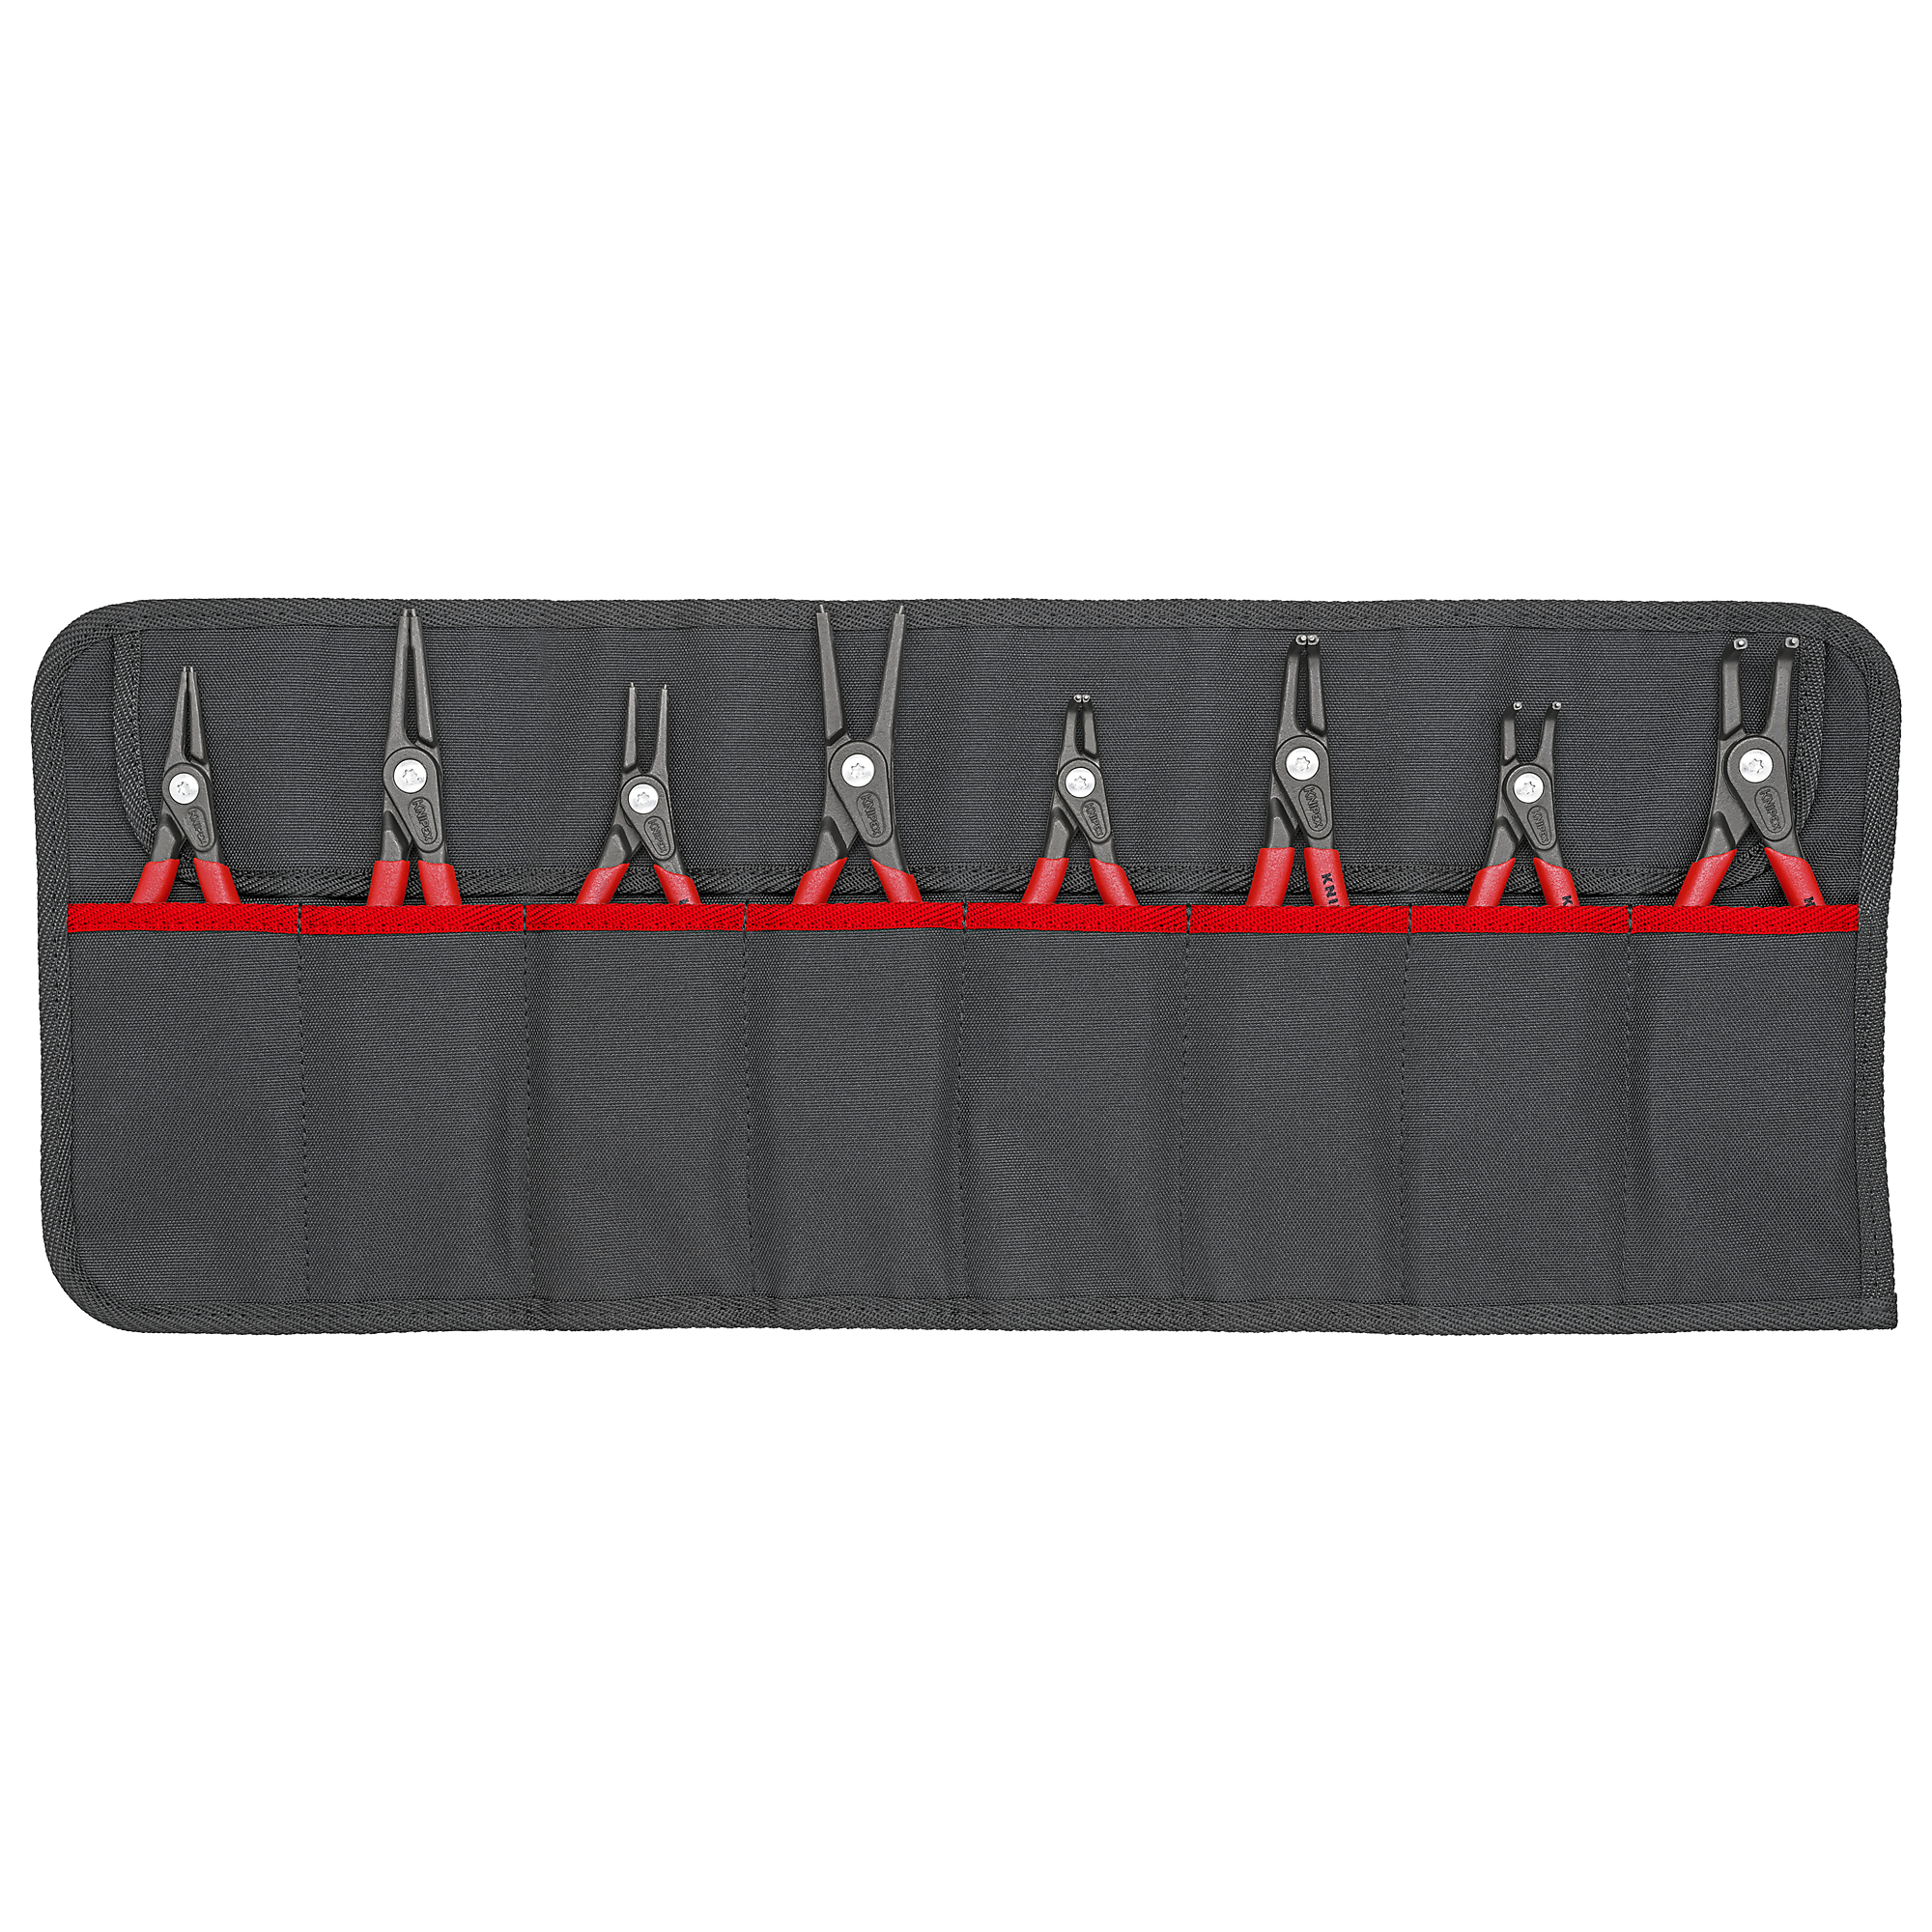 KNIPEX, Precision Snap Ring Pliers Set in Tool Roll, 8 Pc, Pieces (qty.) 8 Material Steel, Model 00 19 58 V02